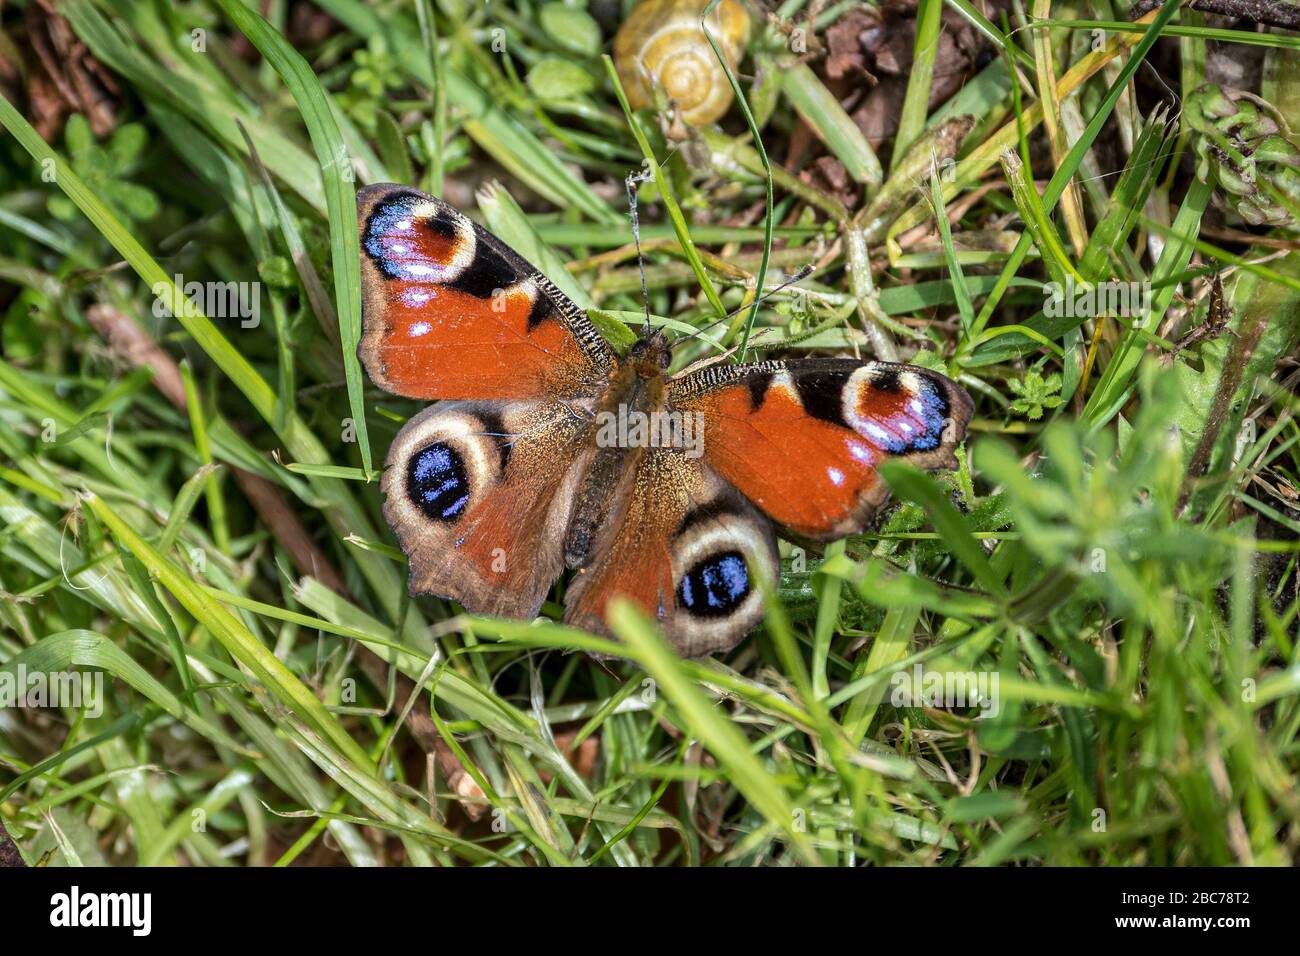 A Peacock butterfly. Stock Photo